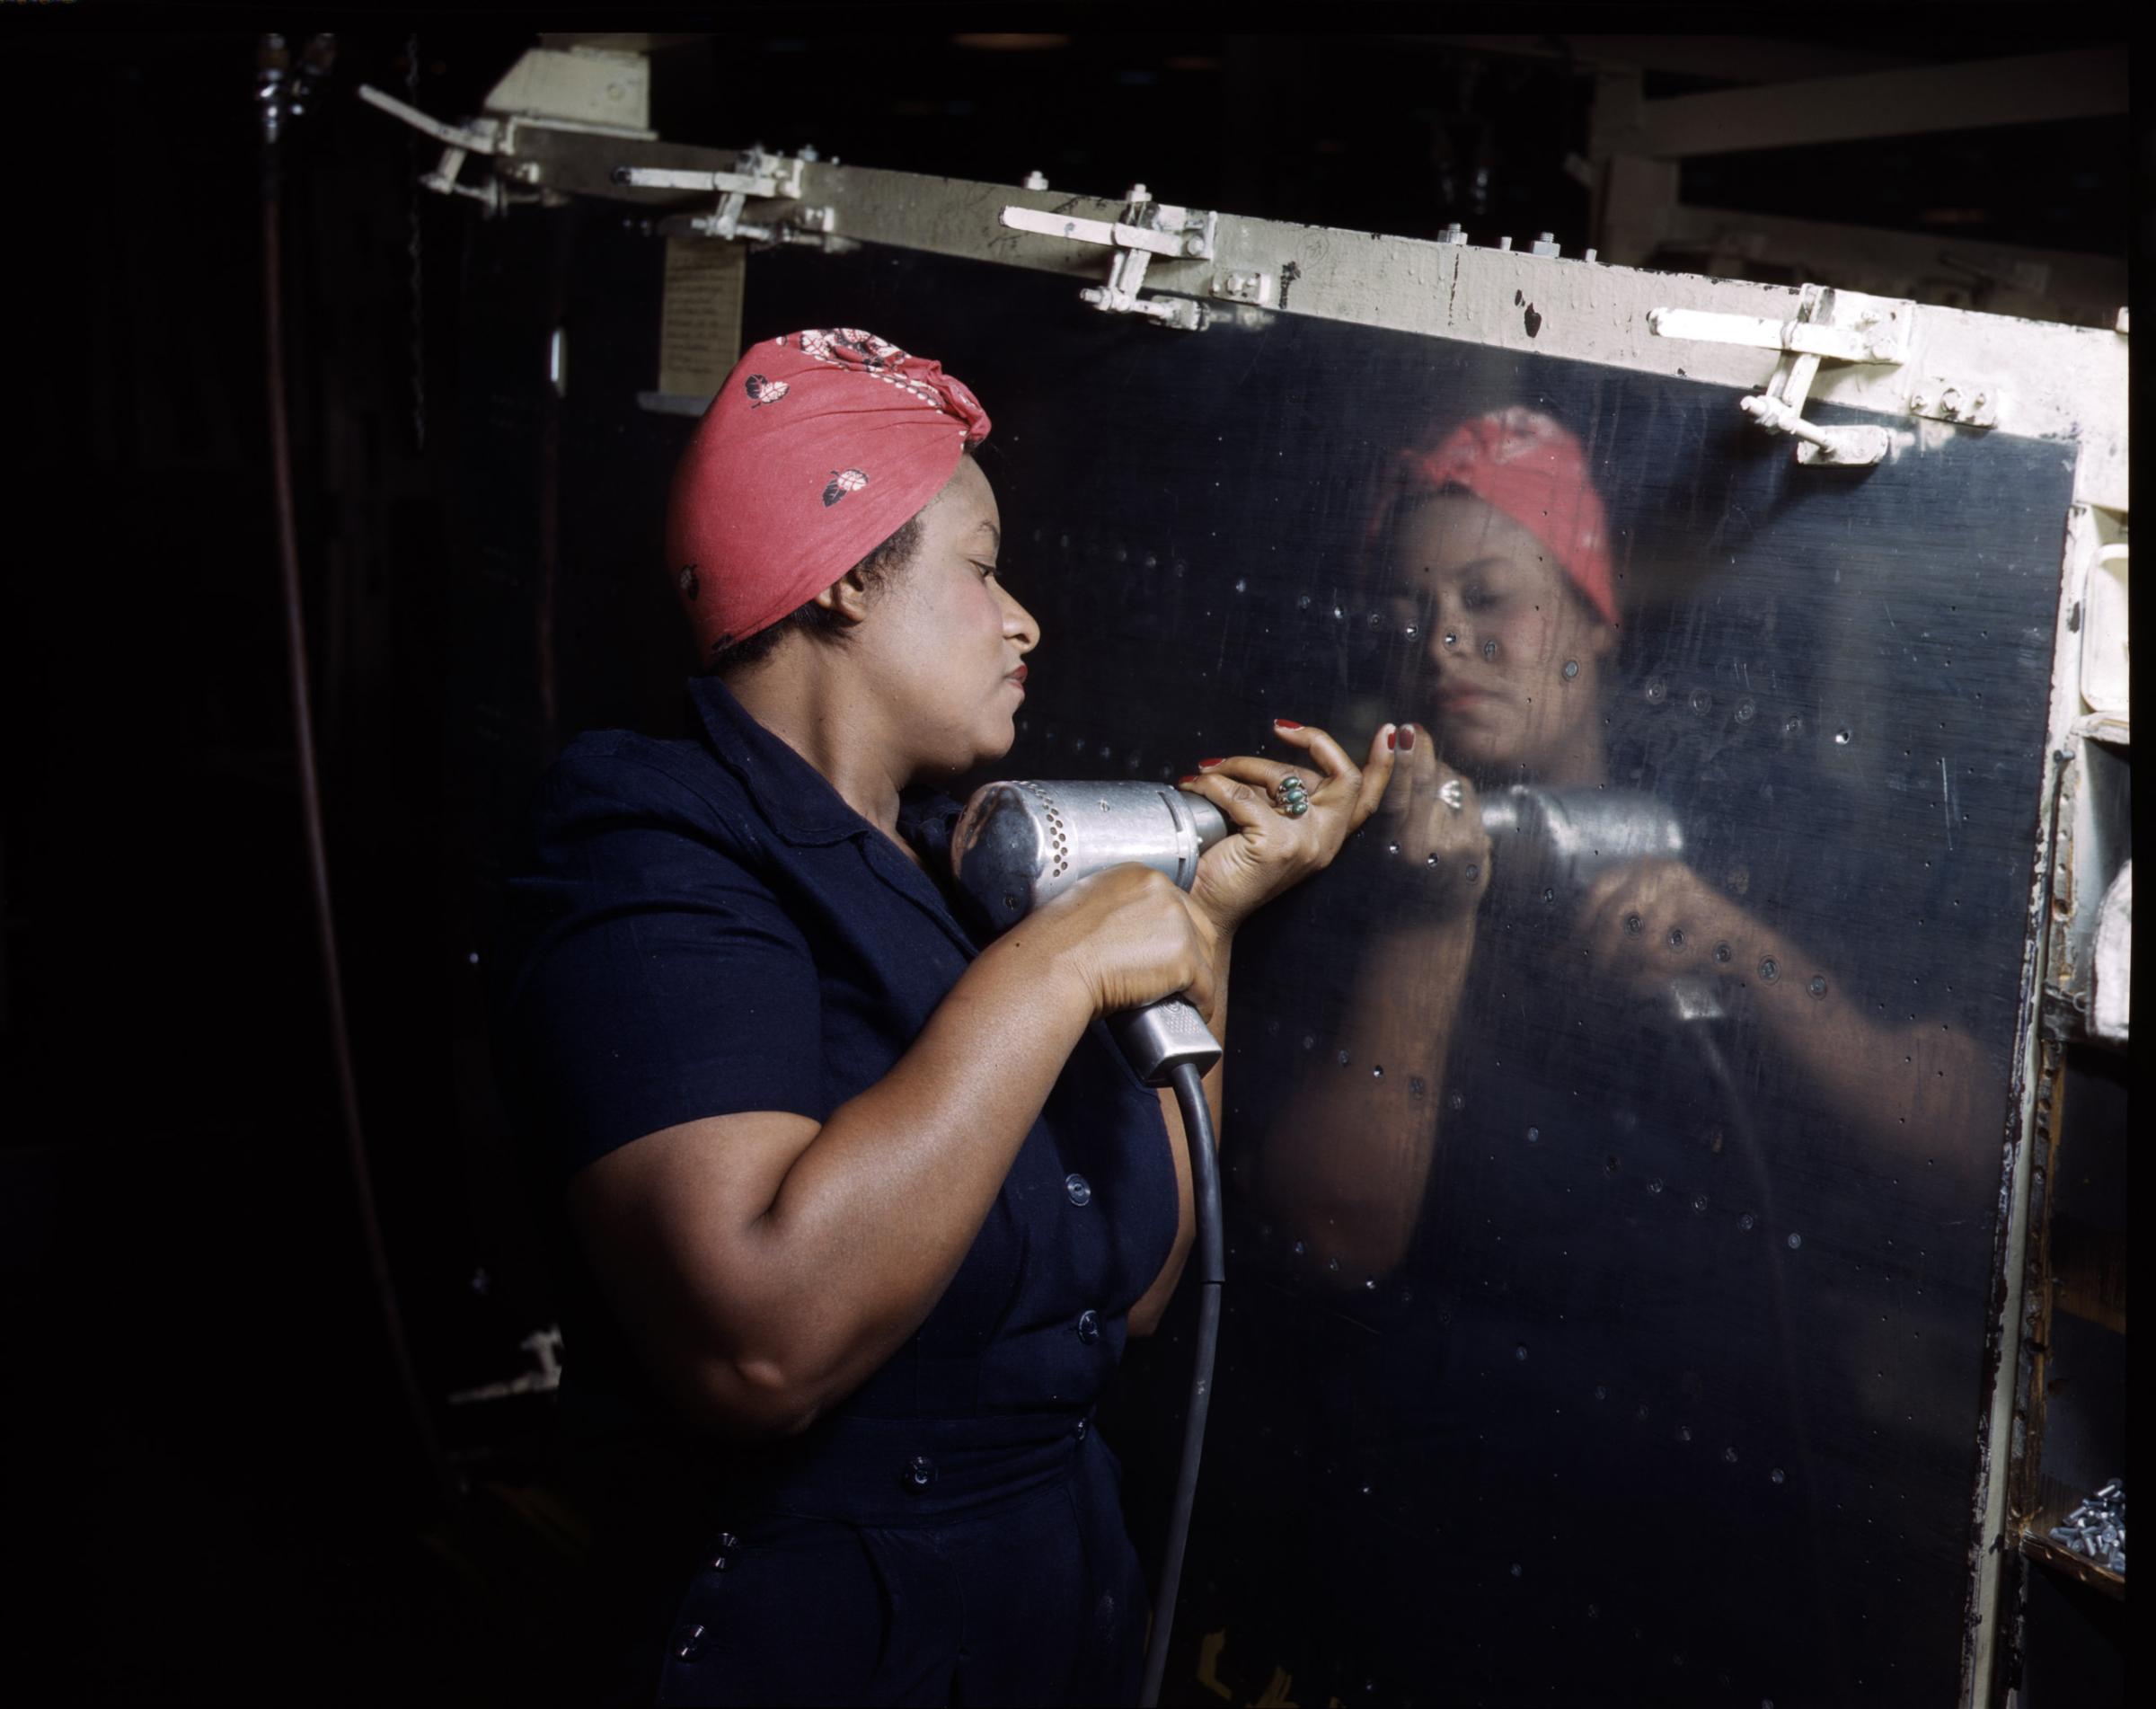 Operating a hand drill at Vultee-Nashville, woman is working on a "Vengeance" dive bomber, Tennessee, February 1943. Photographed by Alfred T. Palmer for the Farm Security Administration.